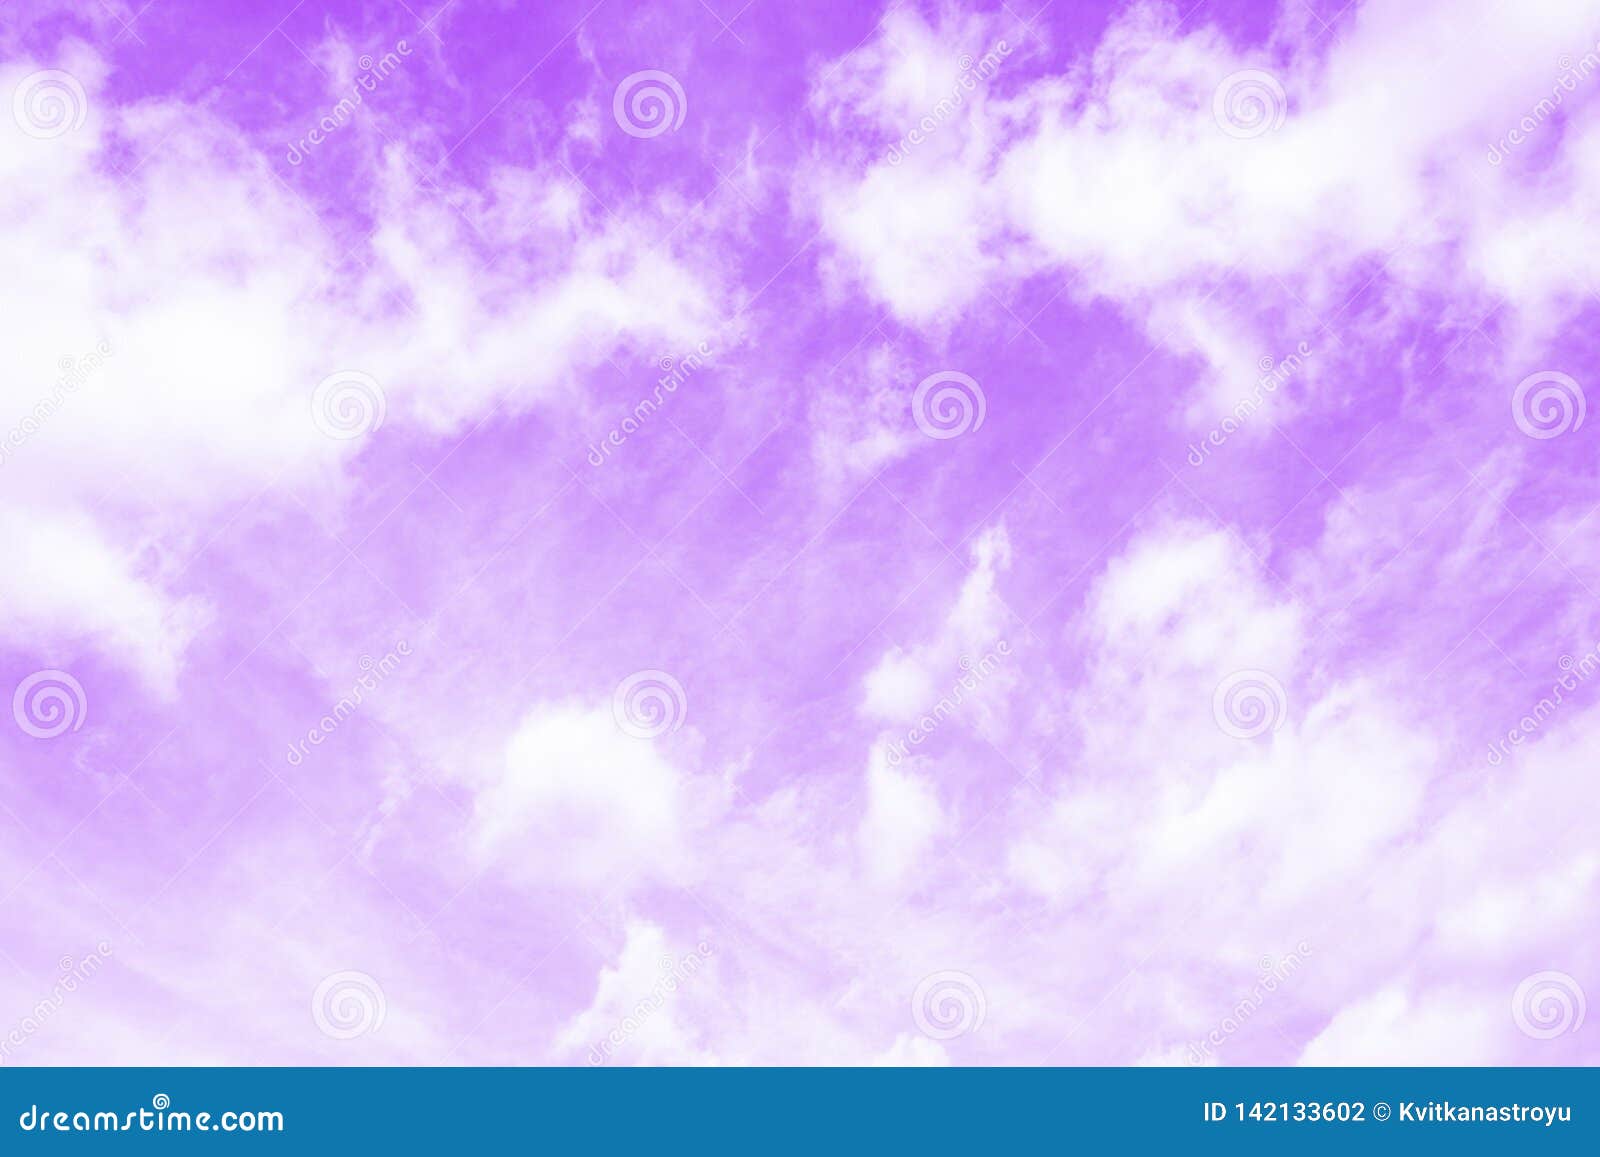 violet purple sky with white cirro cumulus clouds